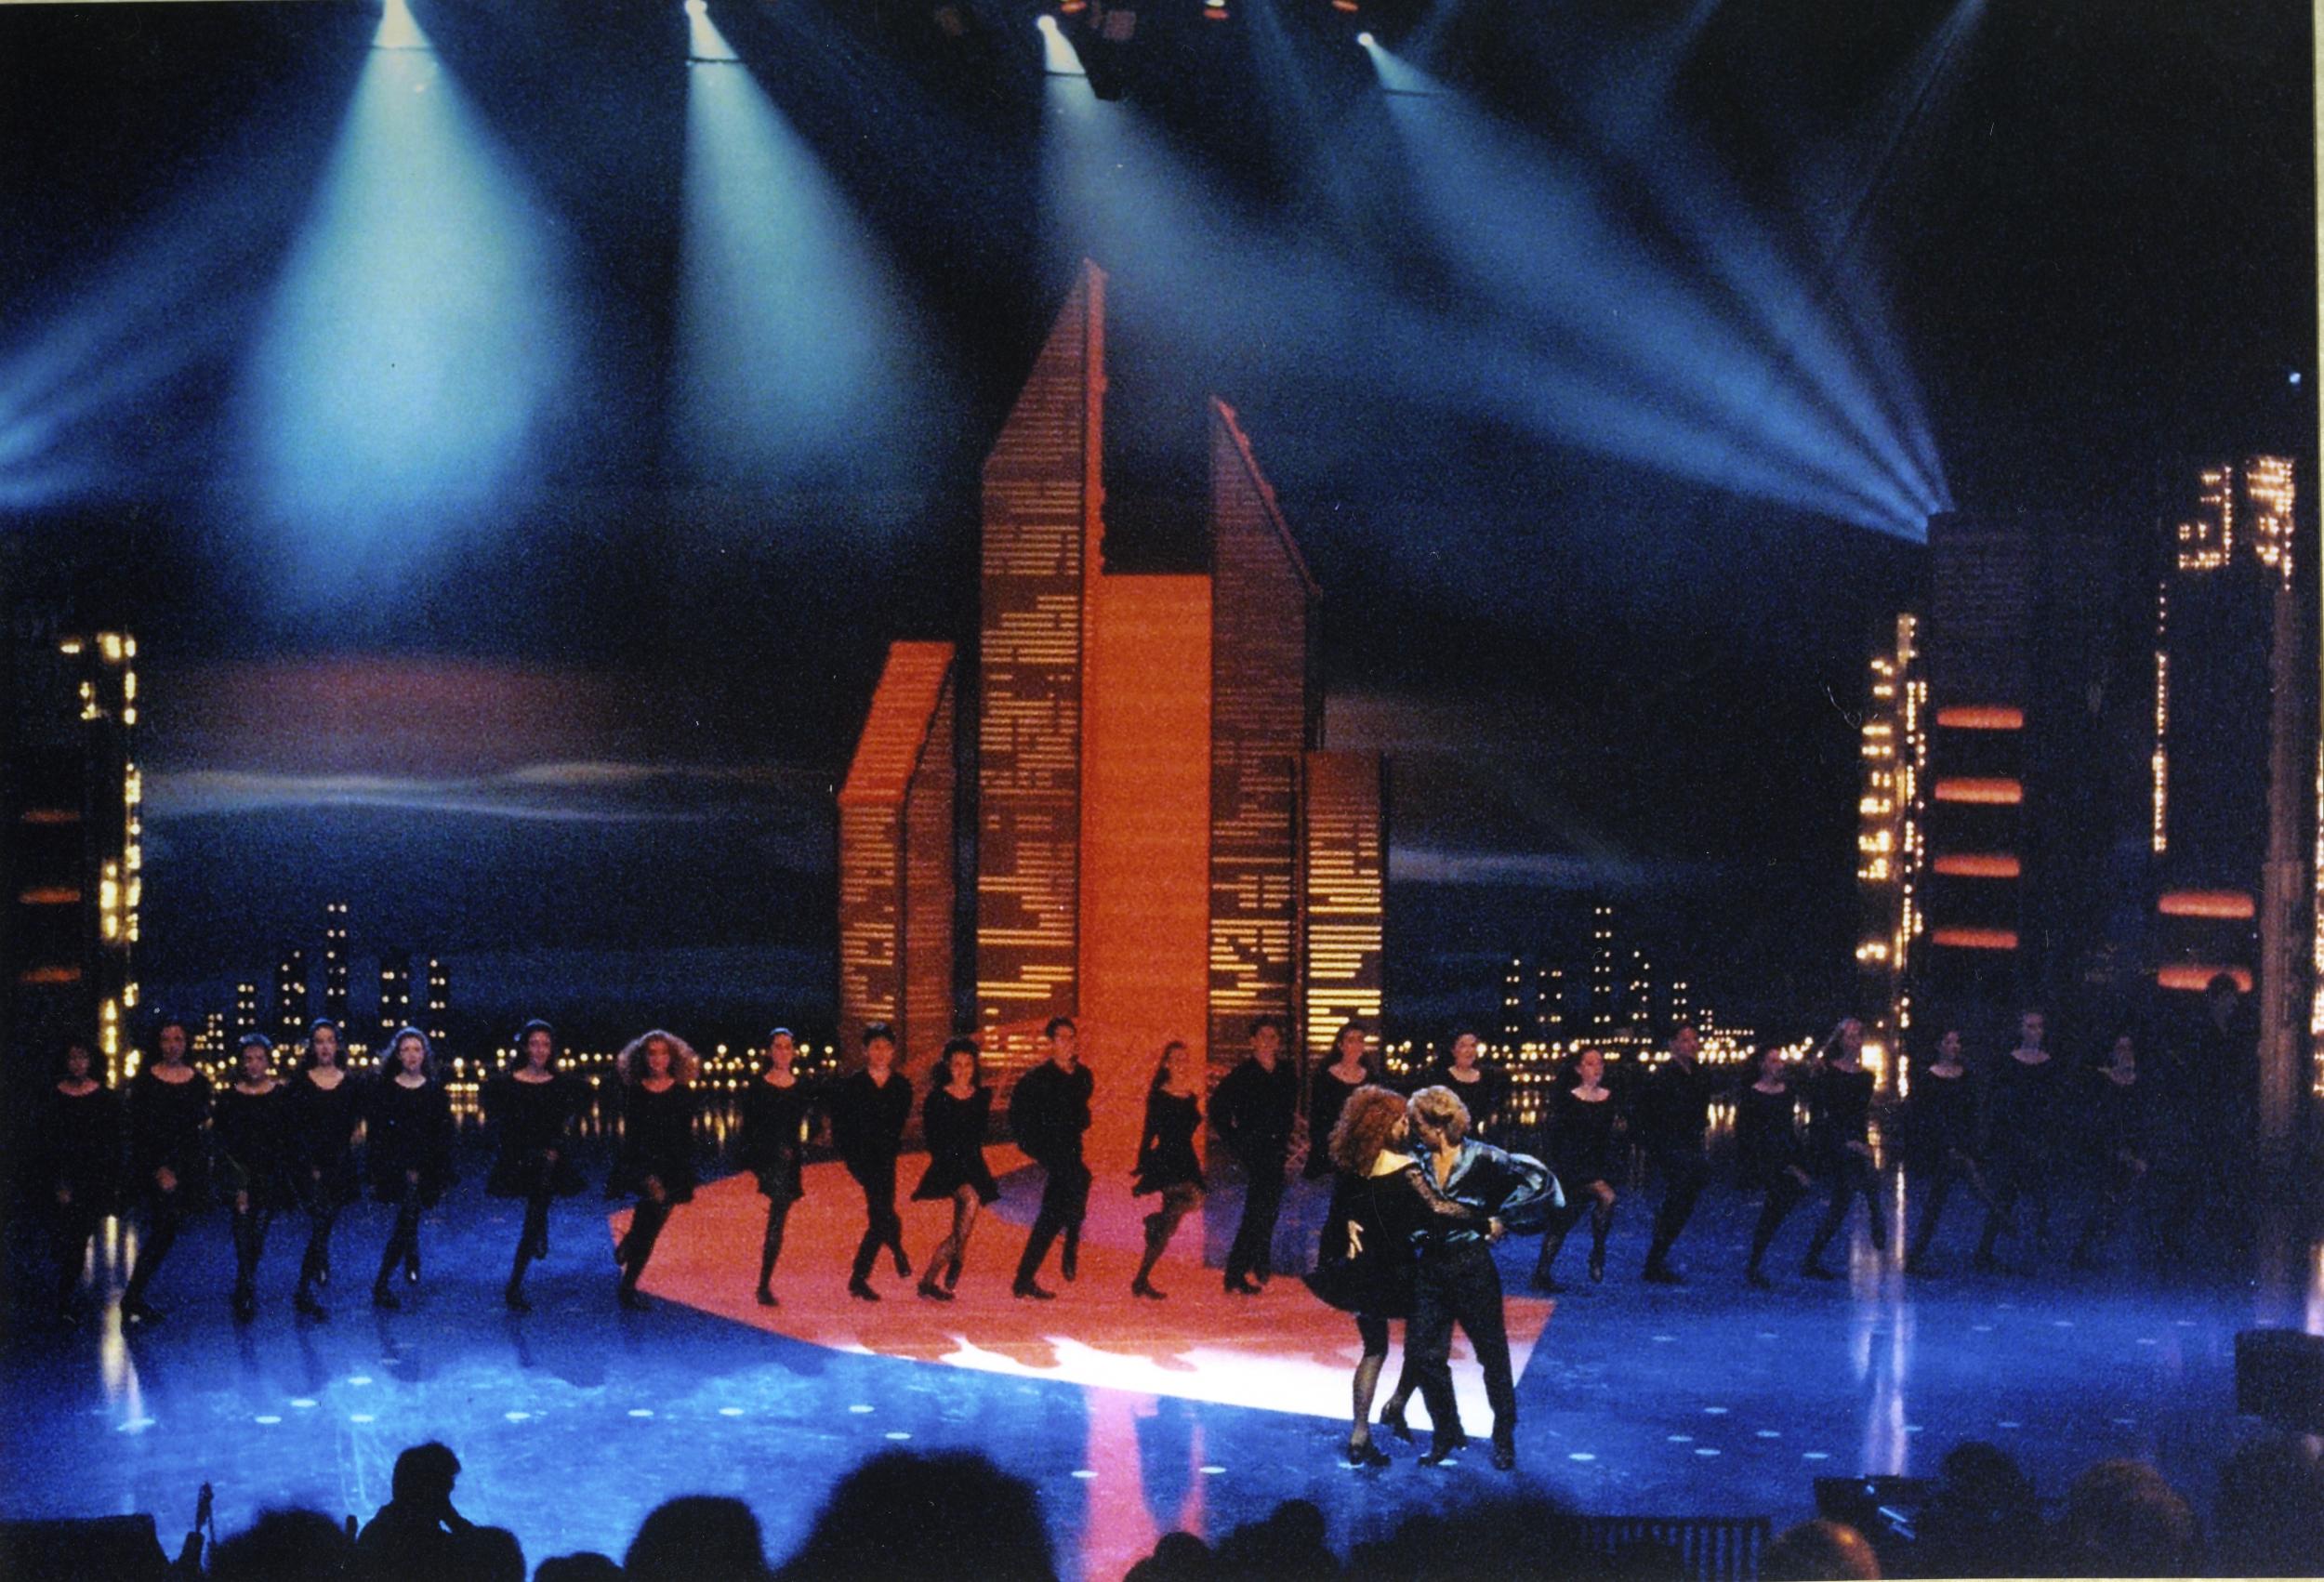 The original performance of Riverdance during the 1994 Eurovision Song Contest in Dublin